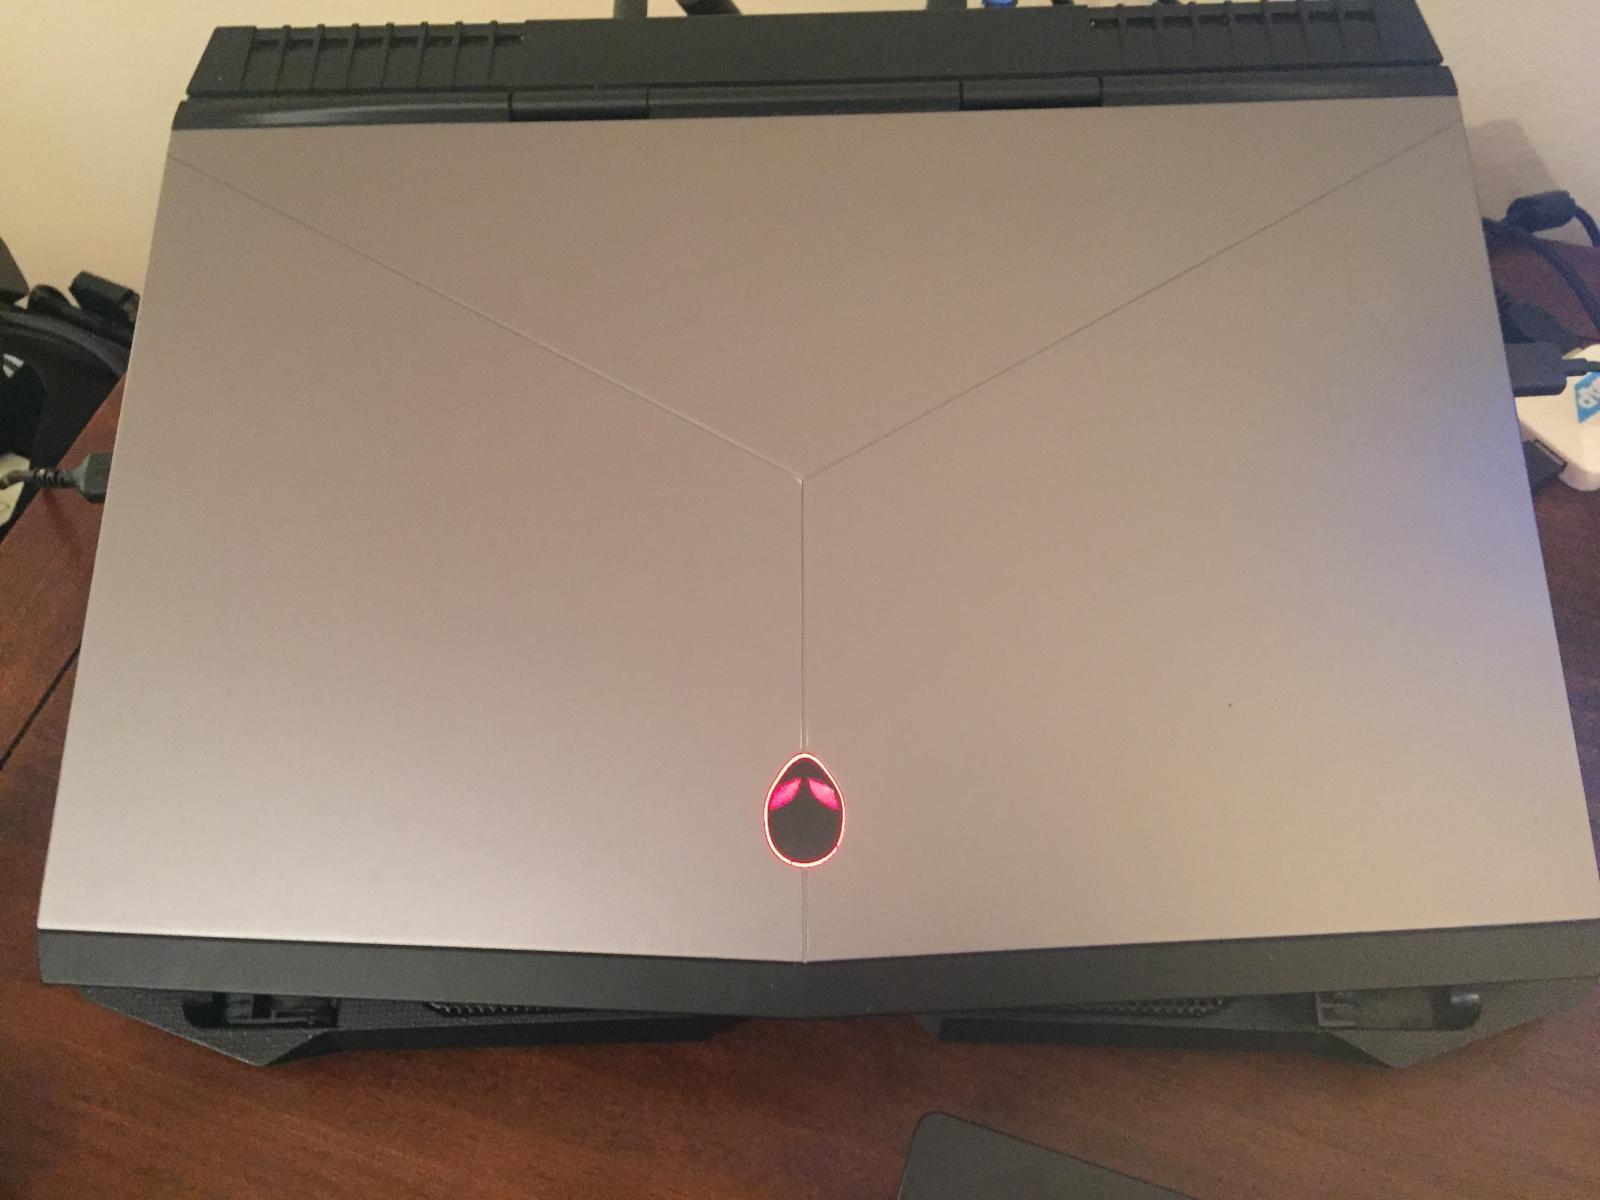 For sale Alienware 15 R3 - Great Condition